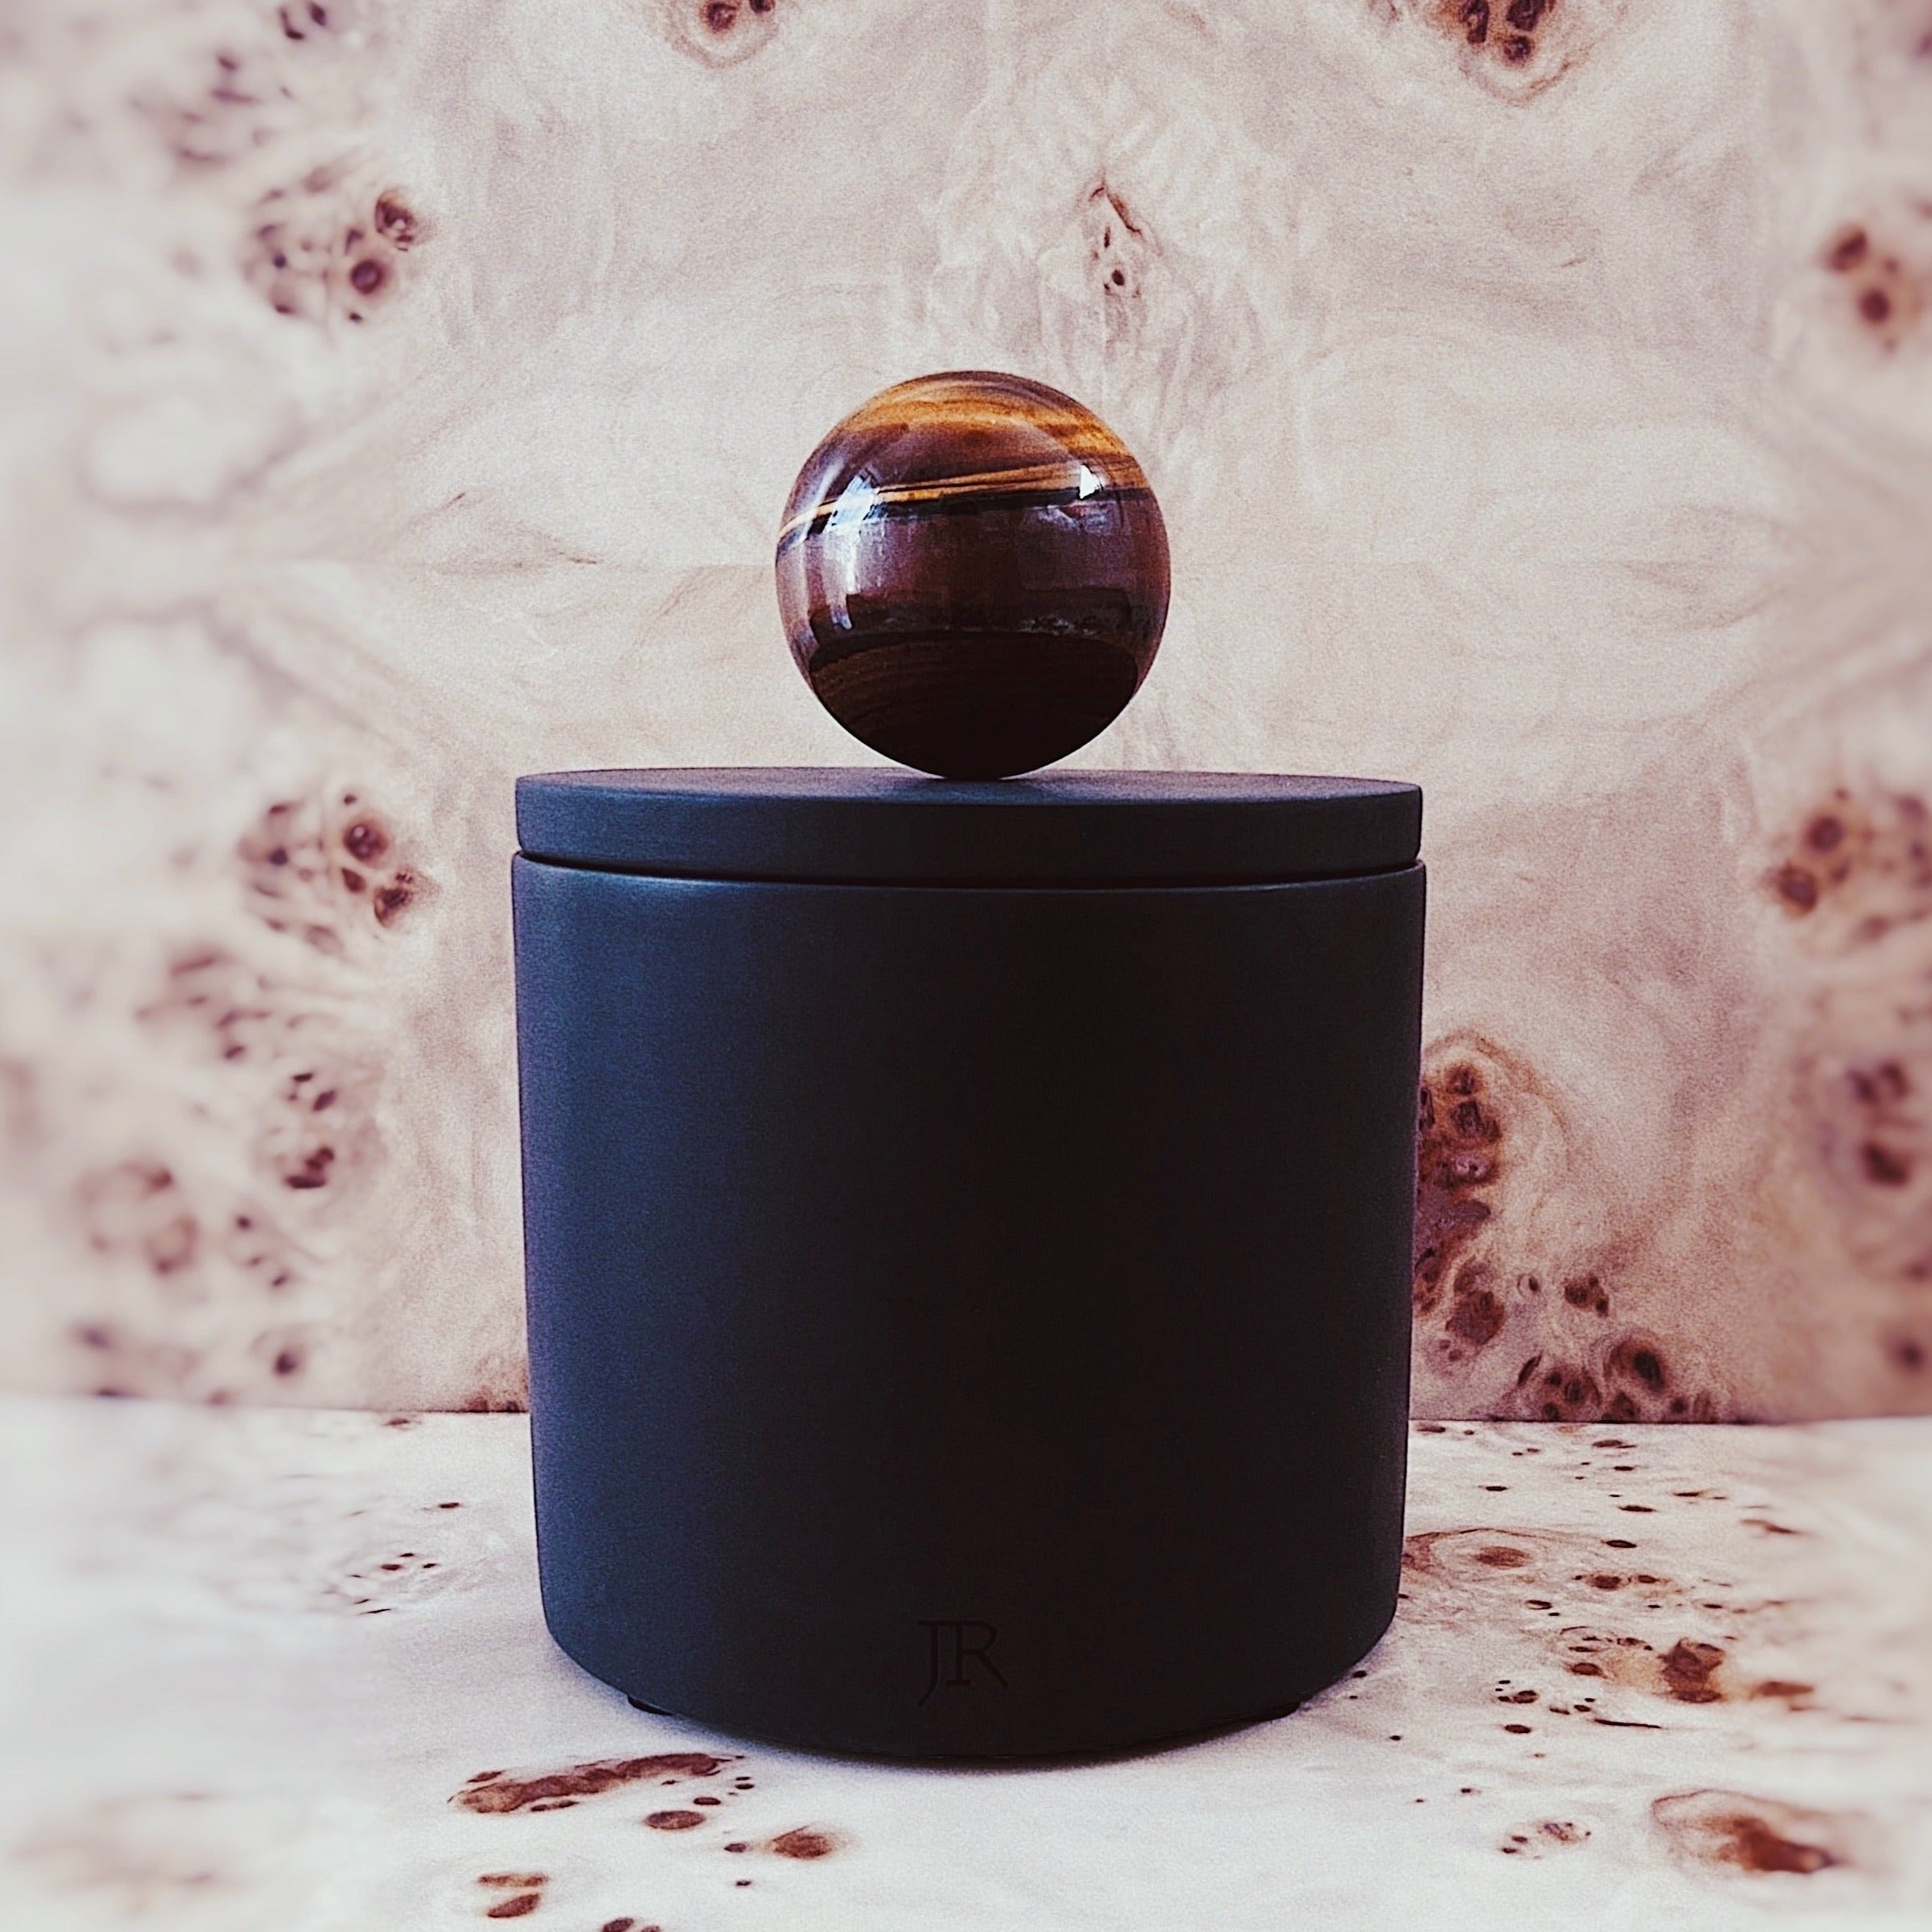 Orb Tiger's eye candle vessel